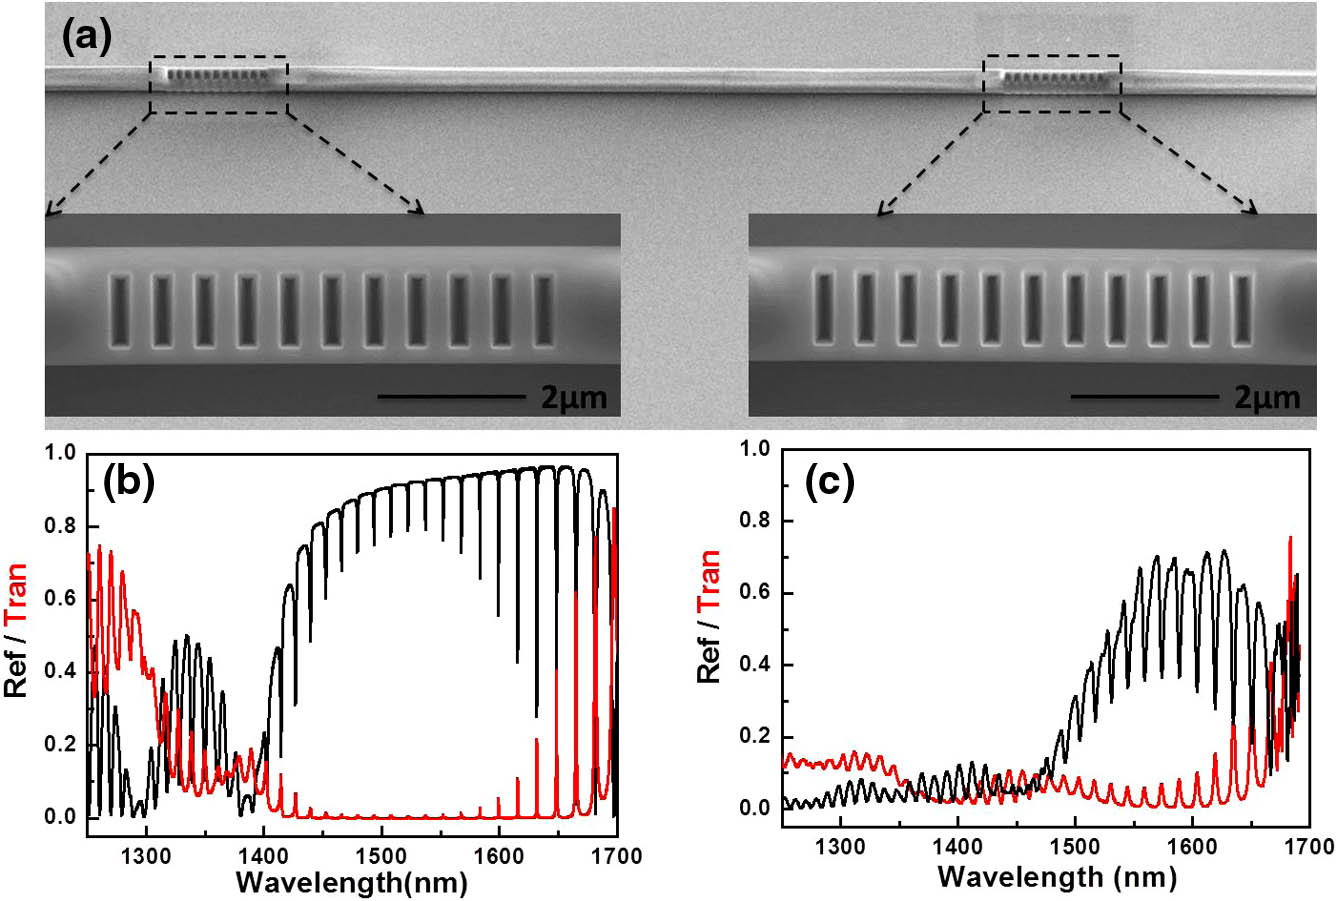 (a) SEM of the fabricated microcavity. Reflection and transmission spectra of the microcavity whose cavity length is 50 μm, acquired by (b) FDTD simulation and (c) experimental measurement.